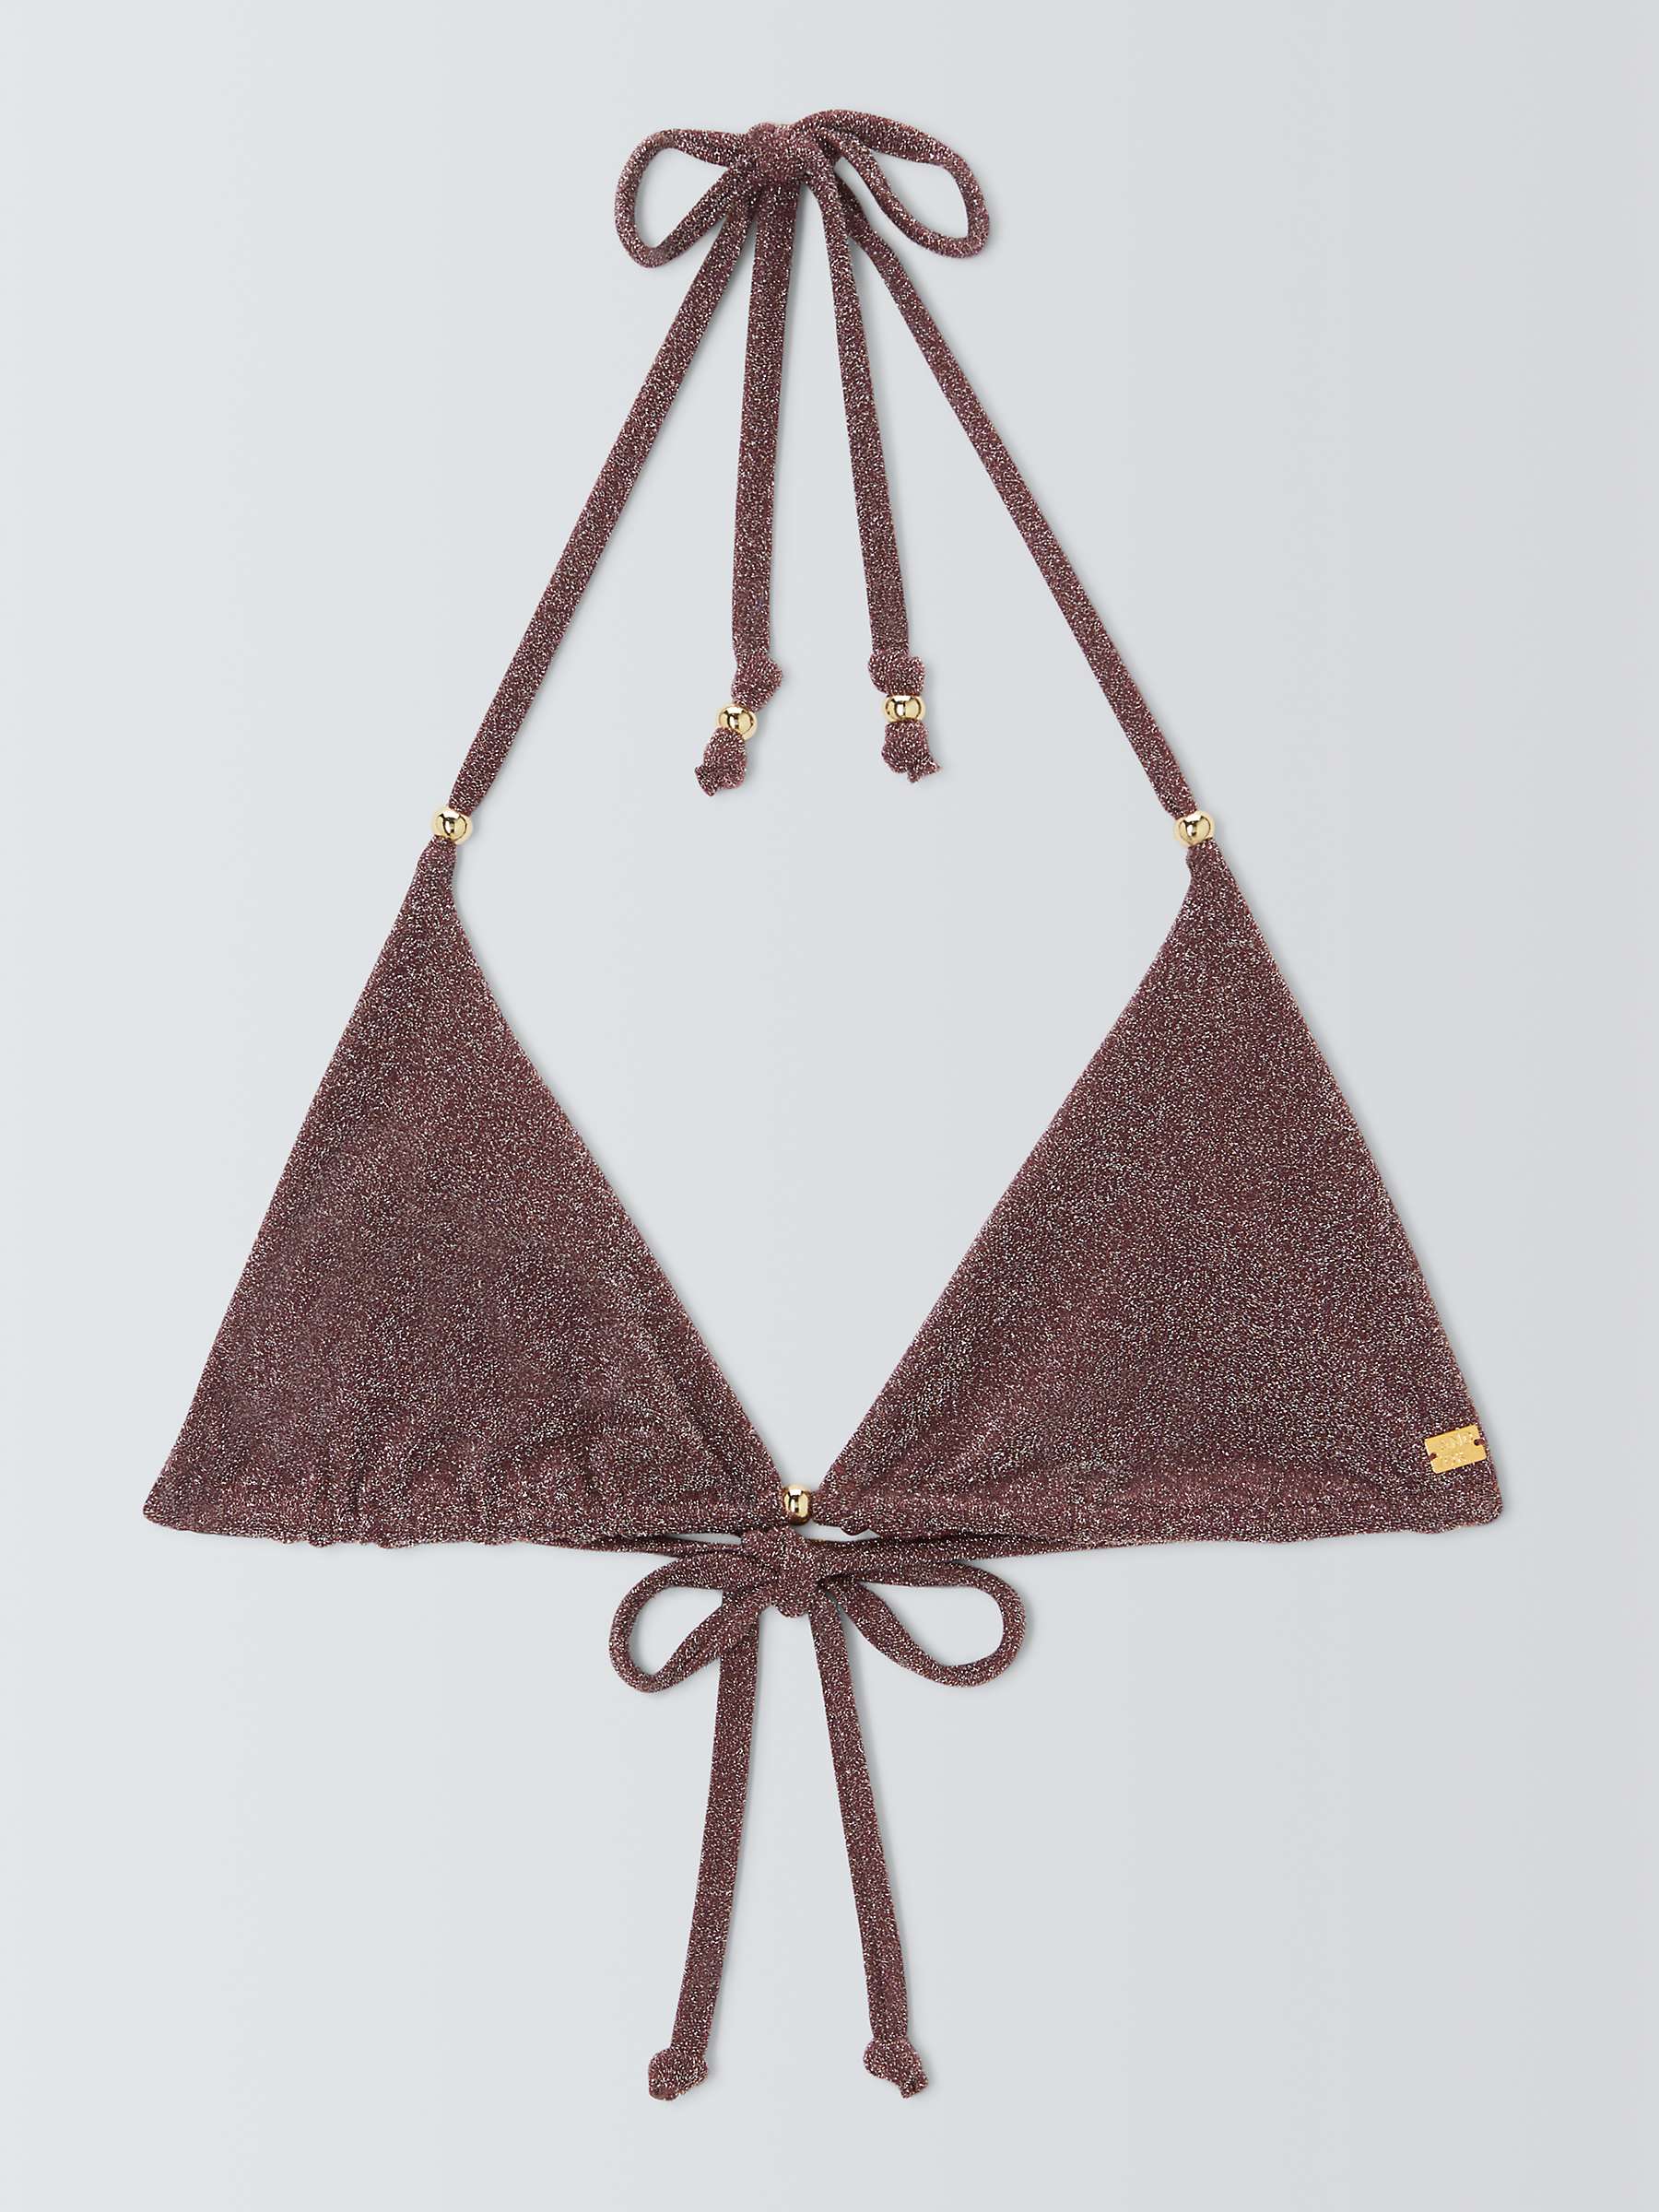 Buy AND/OR Shimmer Triangle Bikini Top, Chocolate Online at johnlewis.com